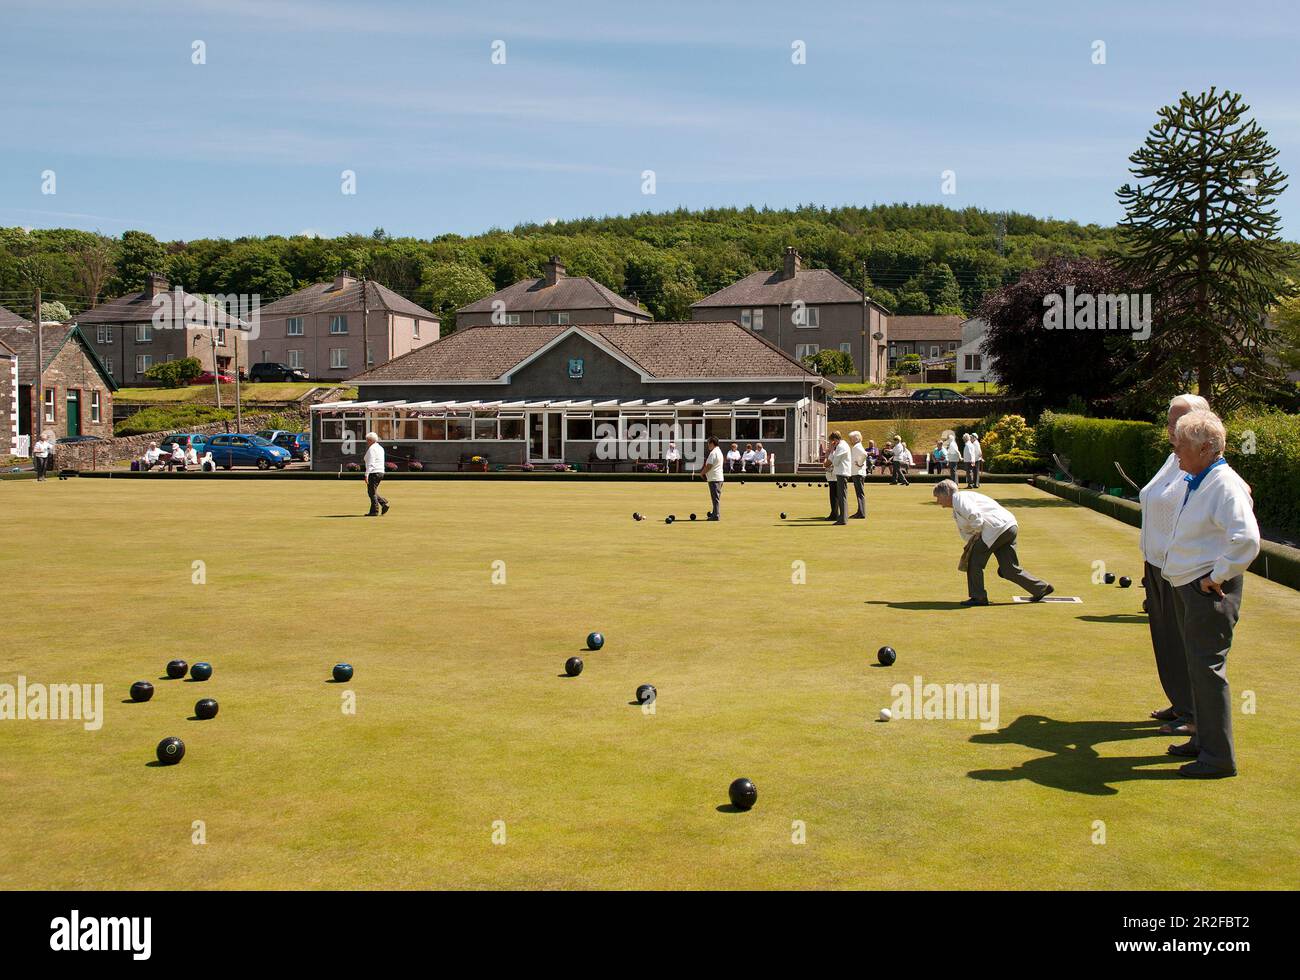 Bowls in play in front of the pavilion of the Kirkcudbright lawn bowling green in Dumfries and Galloway, Scotland, UK Stock Photo